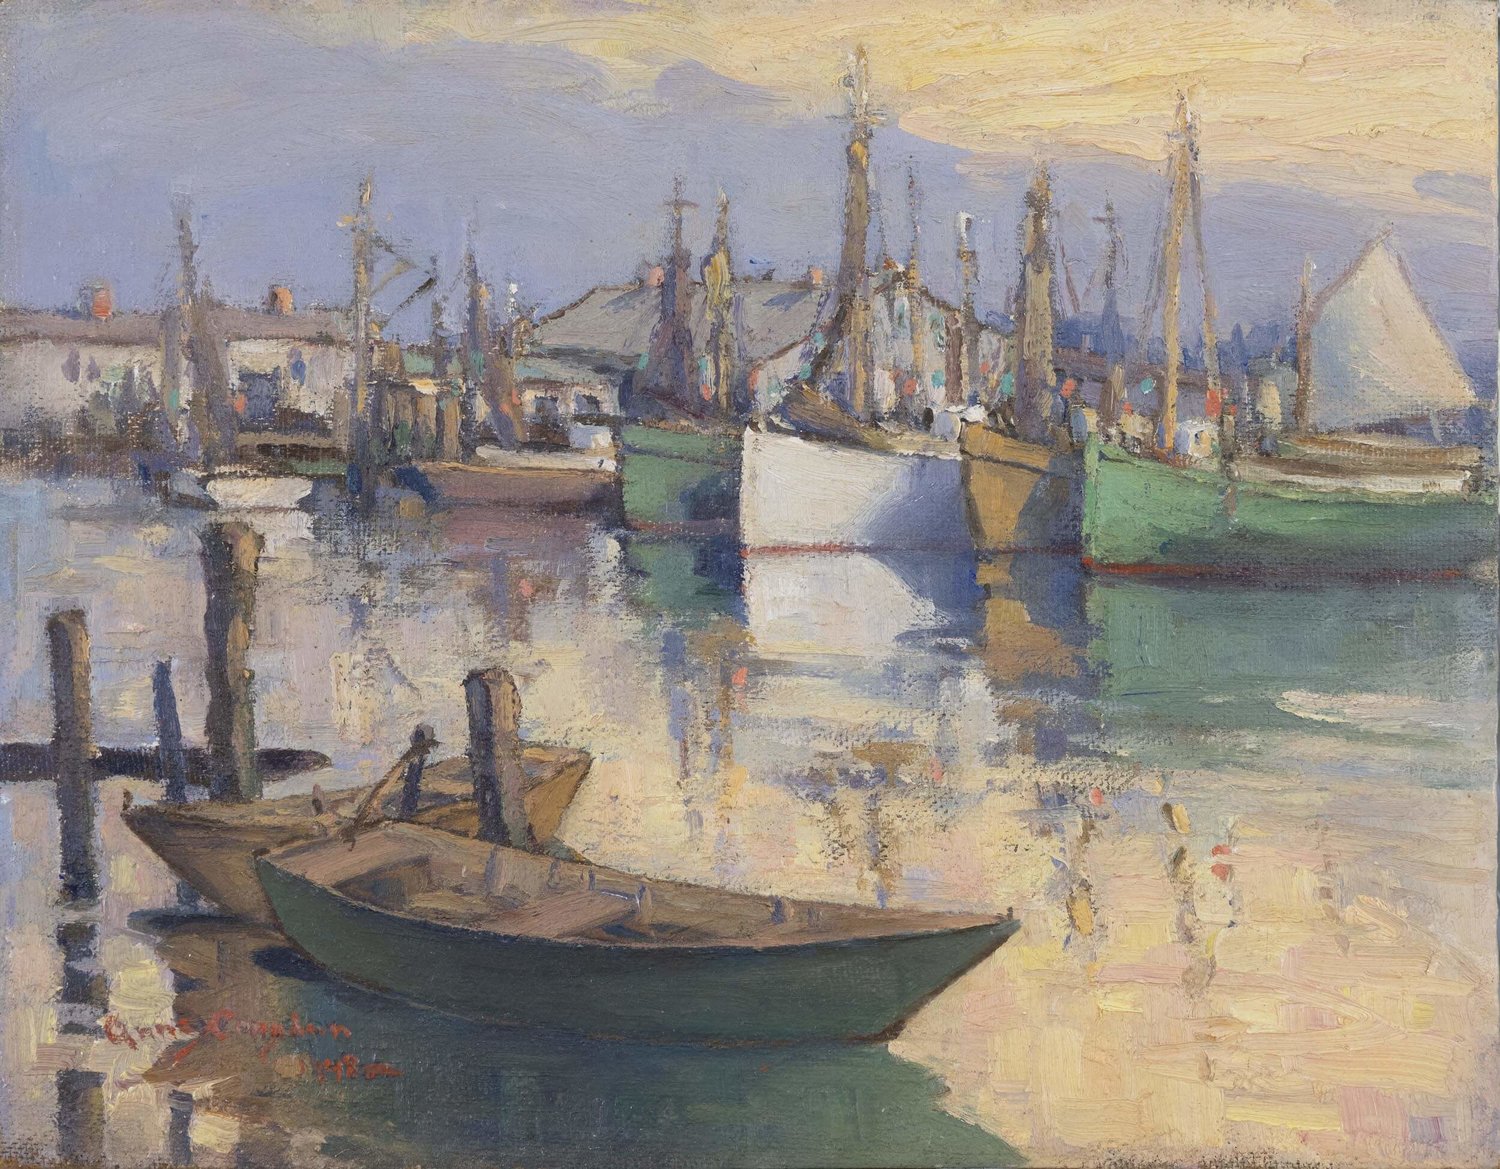 Anne Ramsdell Congdon's "Boats on Killen's Wharf."